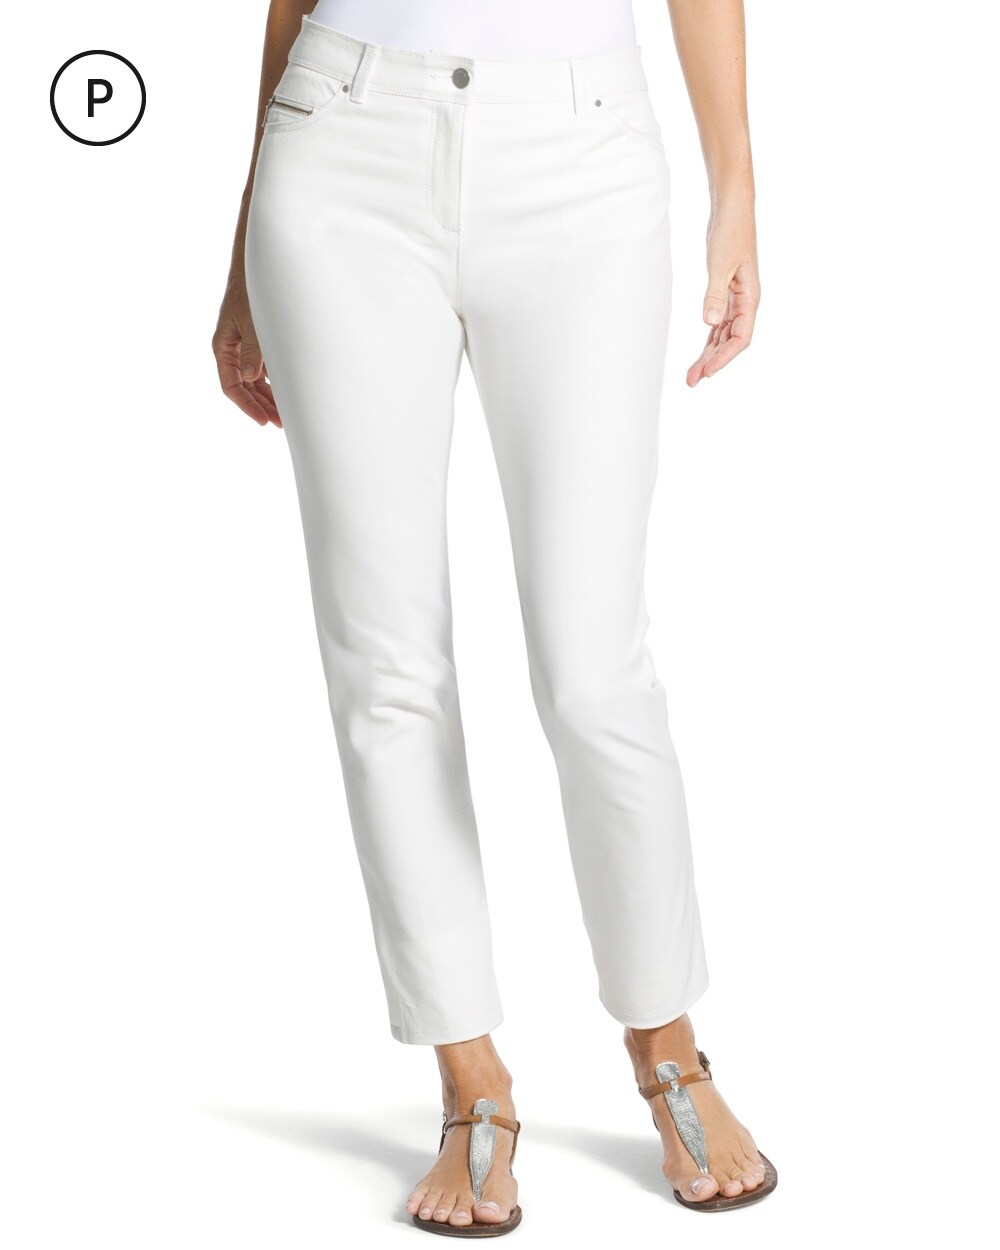 So Slimming Petite Courtney Ankle Pants